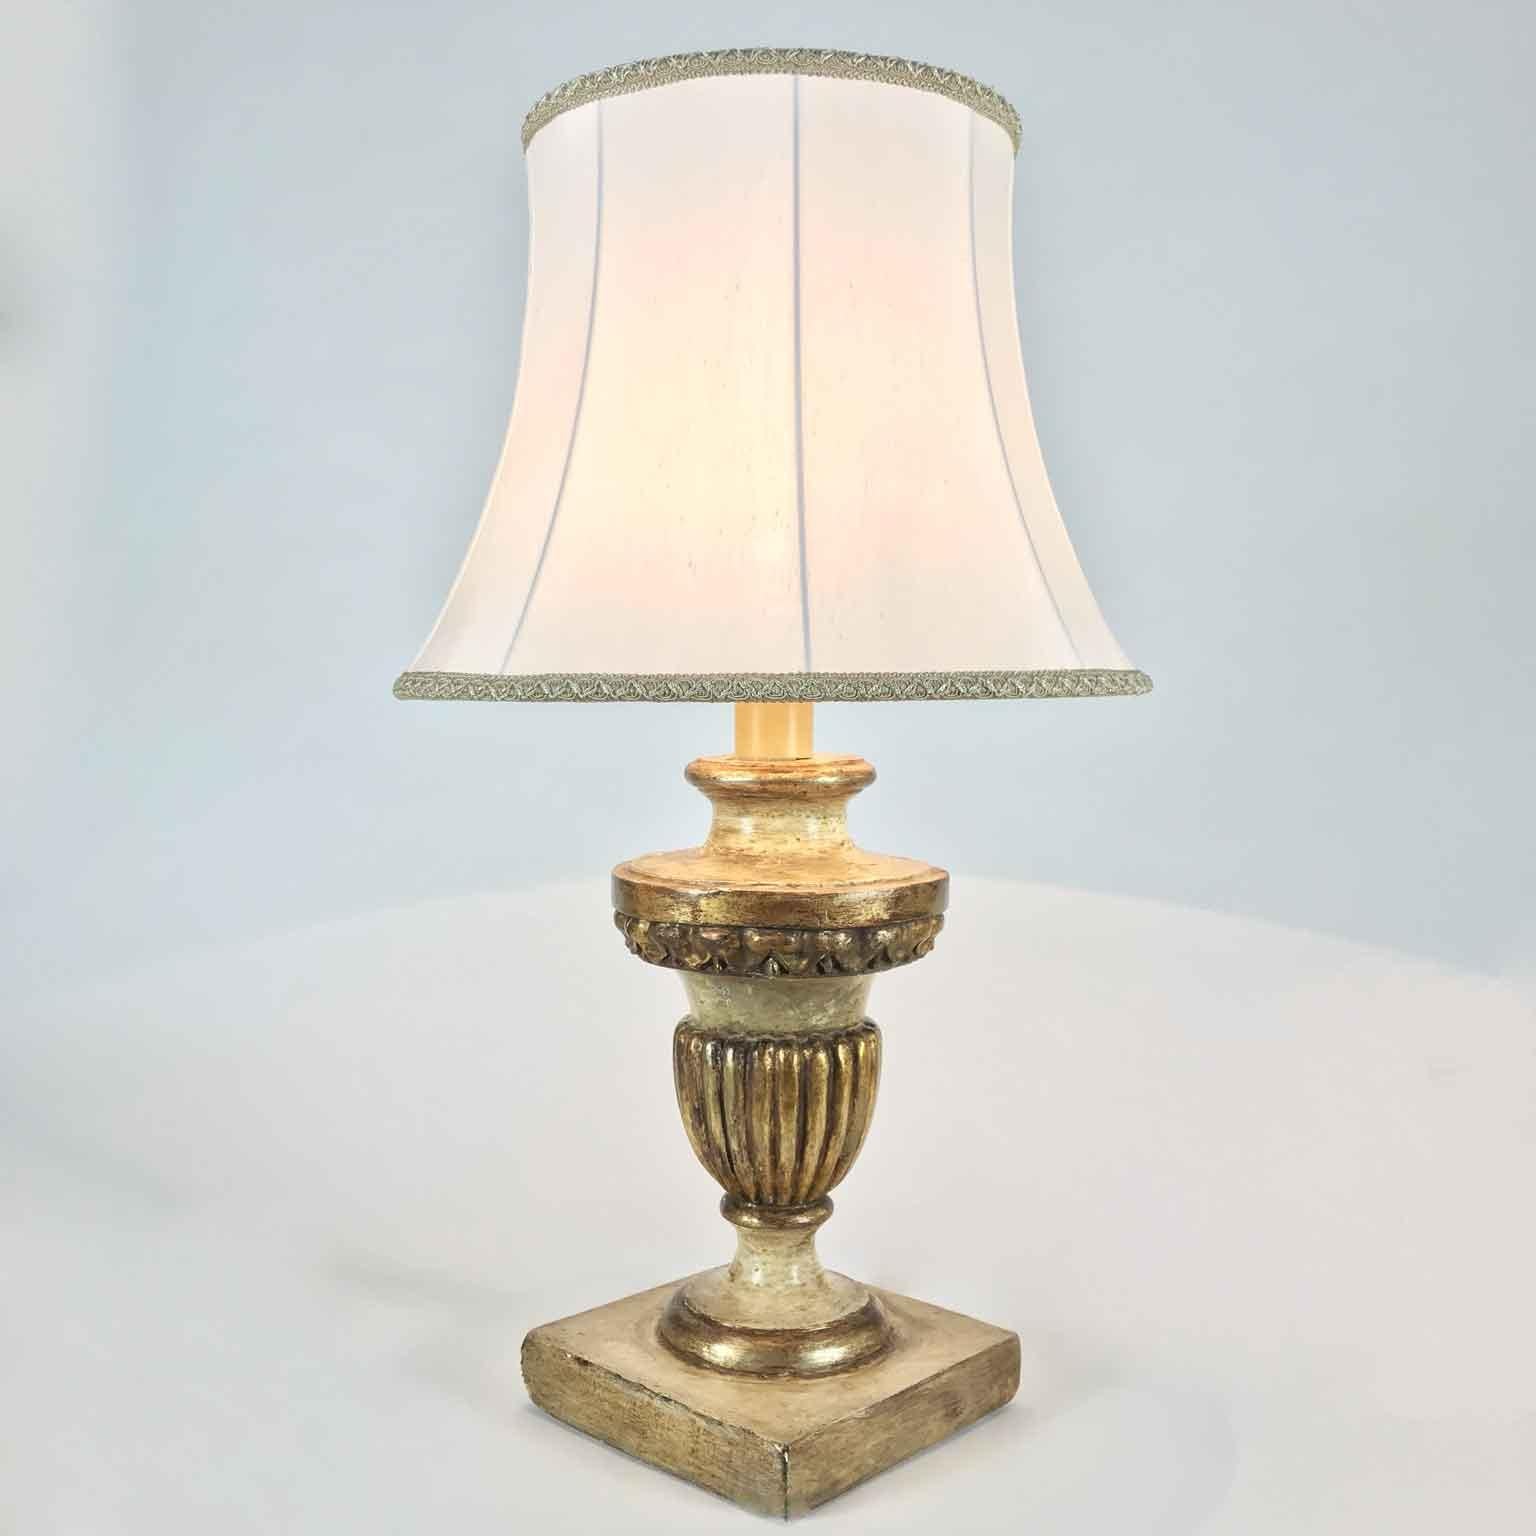 Early 19th century Italian neoclassical circular table lamp on square base, with frontal carving and decoration, ivory color painted and partially gilt with a mecca silver-leaf finish.
This antique table lamp is in good condition, comes from a